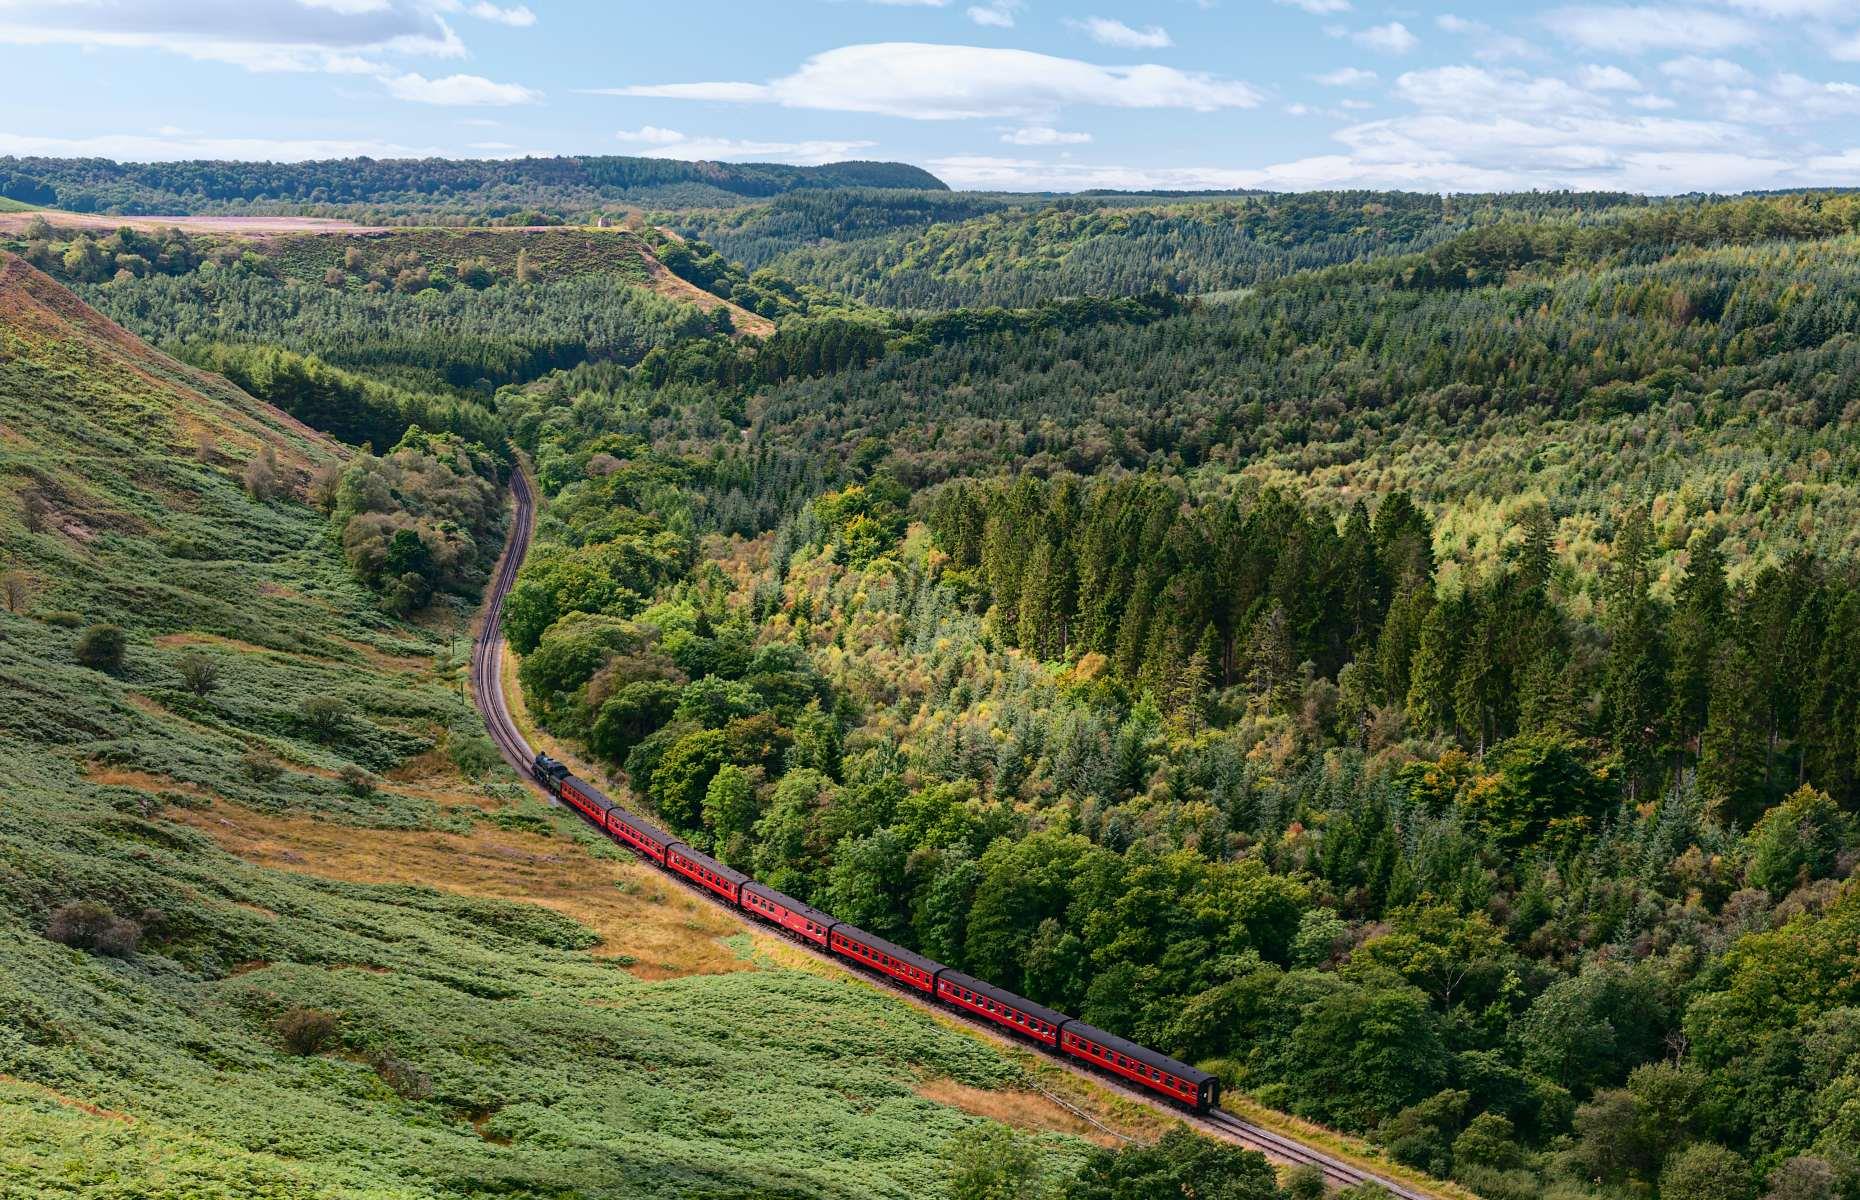 <p>Considered one of the greatest heritage railways in the UK, the <a href="https://www.nymr.co.uk/">North York Moors line</a> has been slicing through Yorkshire’s incredible countryside since 1836. Its vintage steam and diesel trains transport passengers 24 miles (38.6km) back in time through the North York Moors National Park, from the pretty market town of Pickering to the historic seaside resort of Whitby. There are plenty of beautiful sights and fun attractions along the way, including the lovely village of Levisham and the famous Goathland Station which served as the original Hogsmeade Station in <em>Harry Potter and the Philosopher’s Stone</em>.</p>  <p><a href="https://www.loveexploring.com/guides/88897/what-to-see-where-to-stay-north-york-moors"><strong>Inspired? See our guide on what else to do in the North York Moors</strong></a></p>